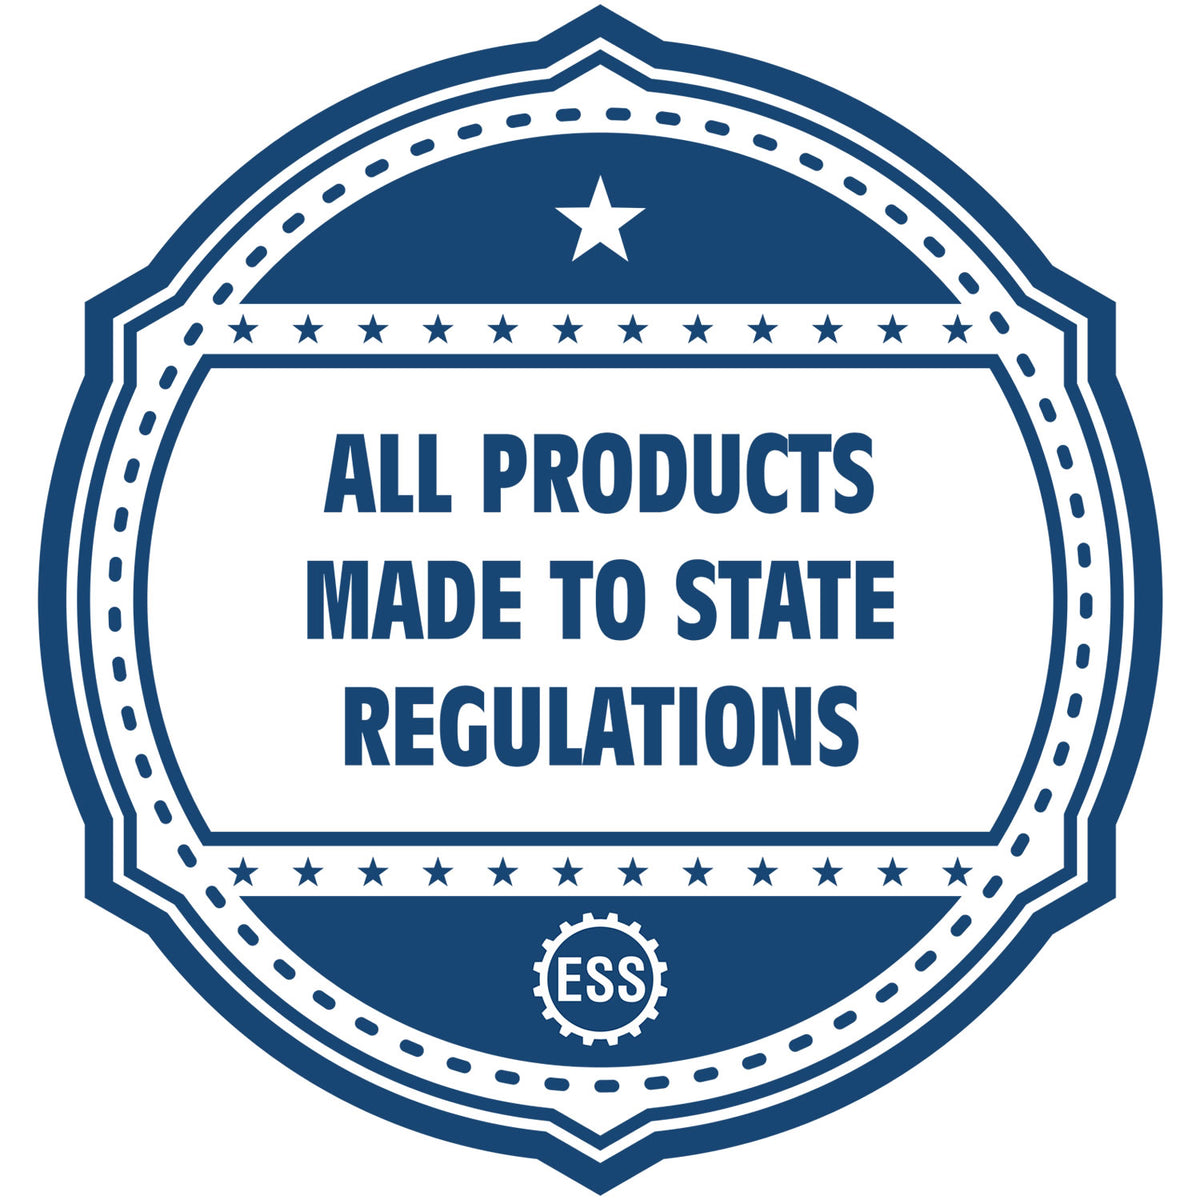 An icon or badge element for the PSI New Mexico Notary Stamp showing that this product is made in compliance with state regulations.